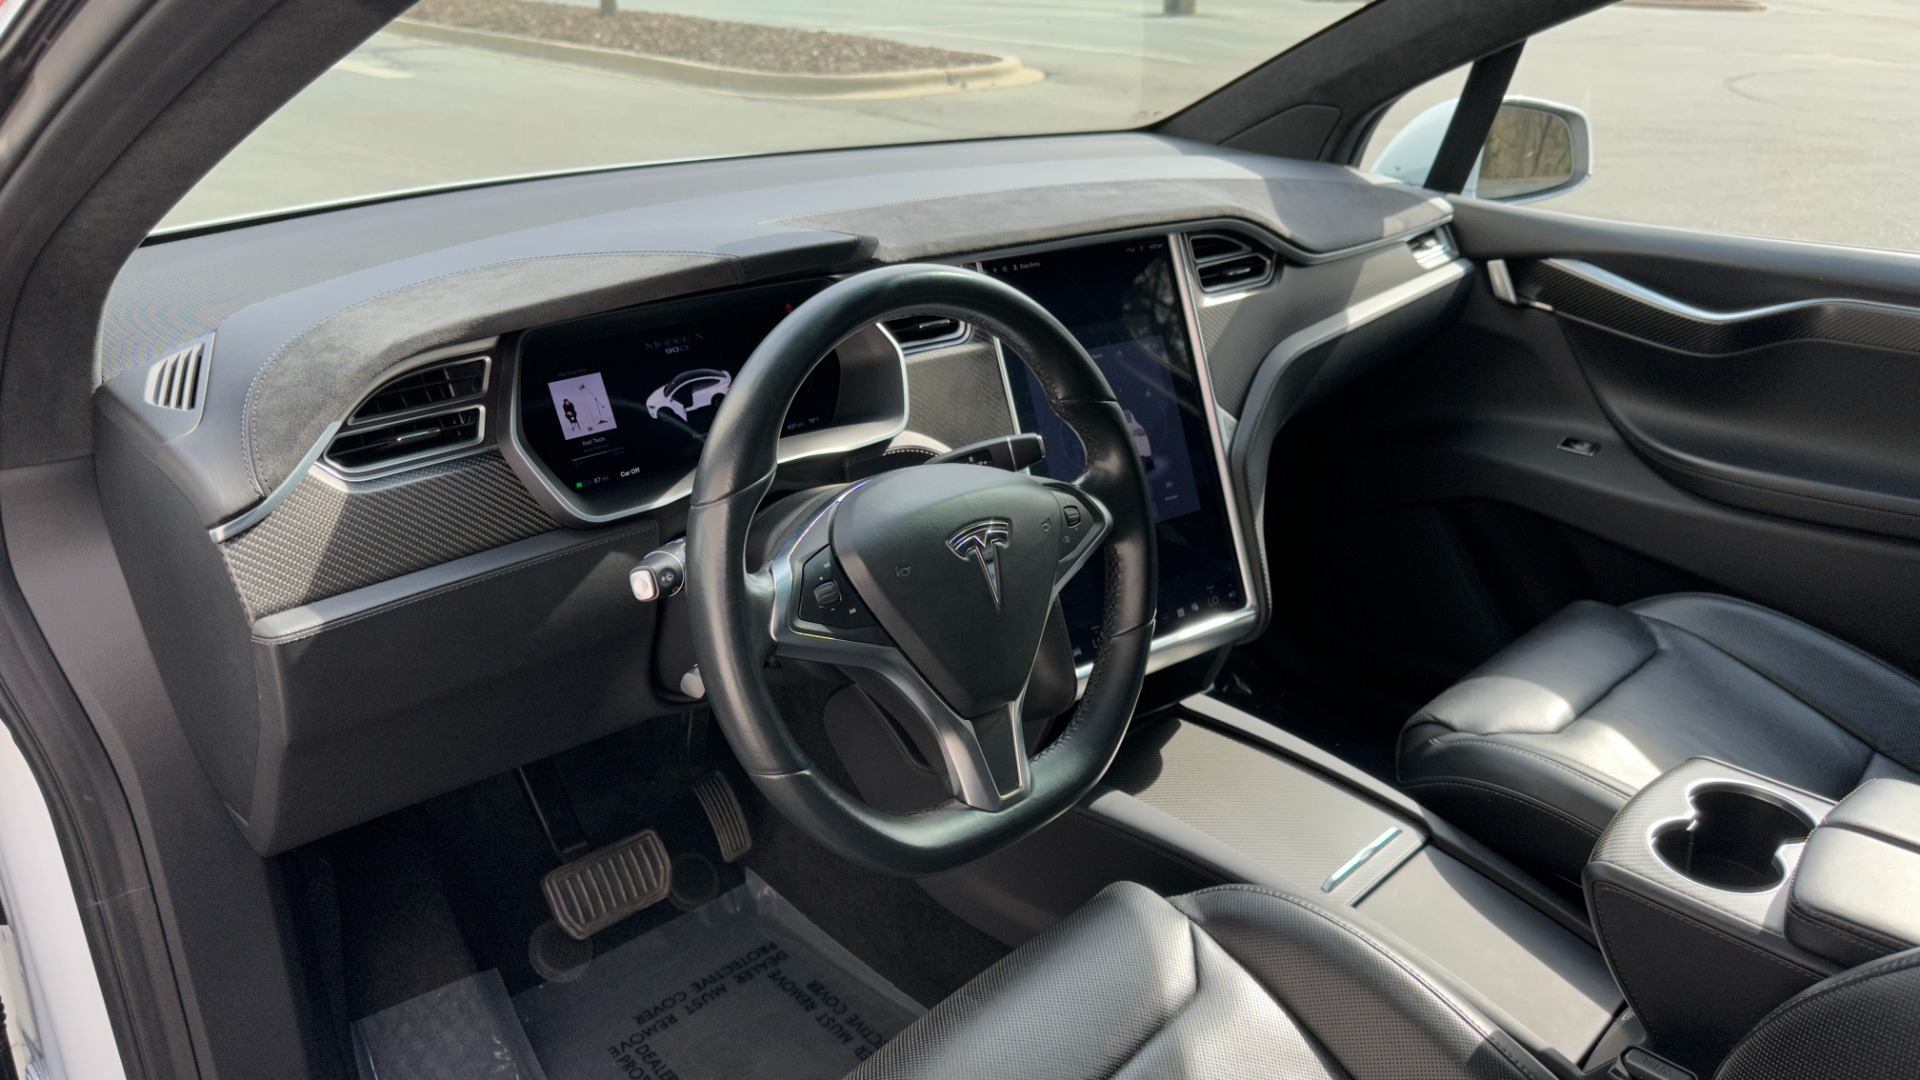 Used 2016 Tesla Model X 90D / HIGHWAY AUTOPILOT / LEATHER / 3RD ROW / CAPTAIN CHAIRS for sale $55,400 at Formula Imports in Charlotte NC 28227 14